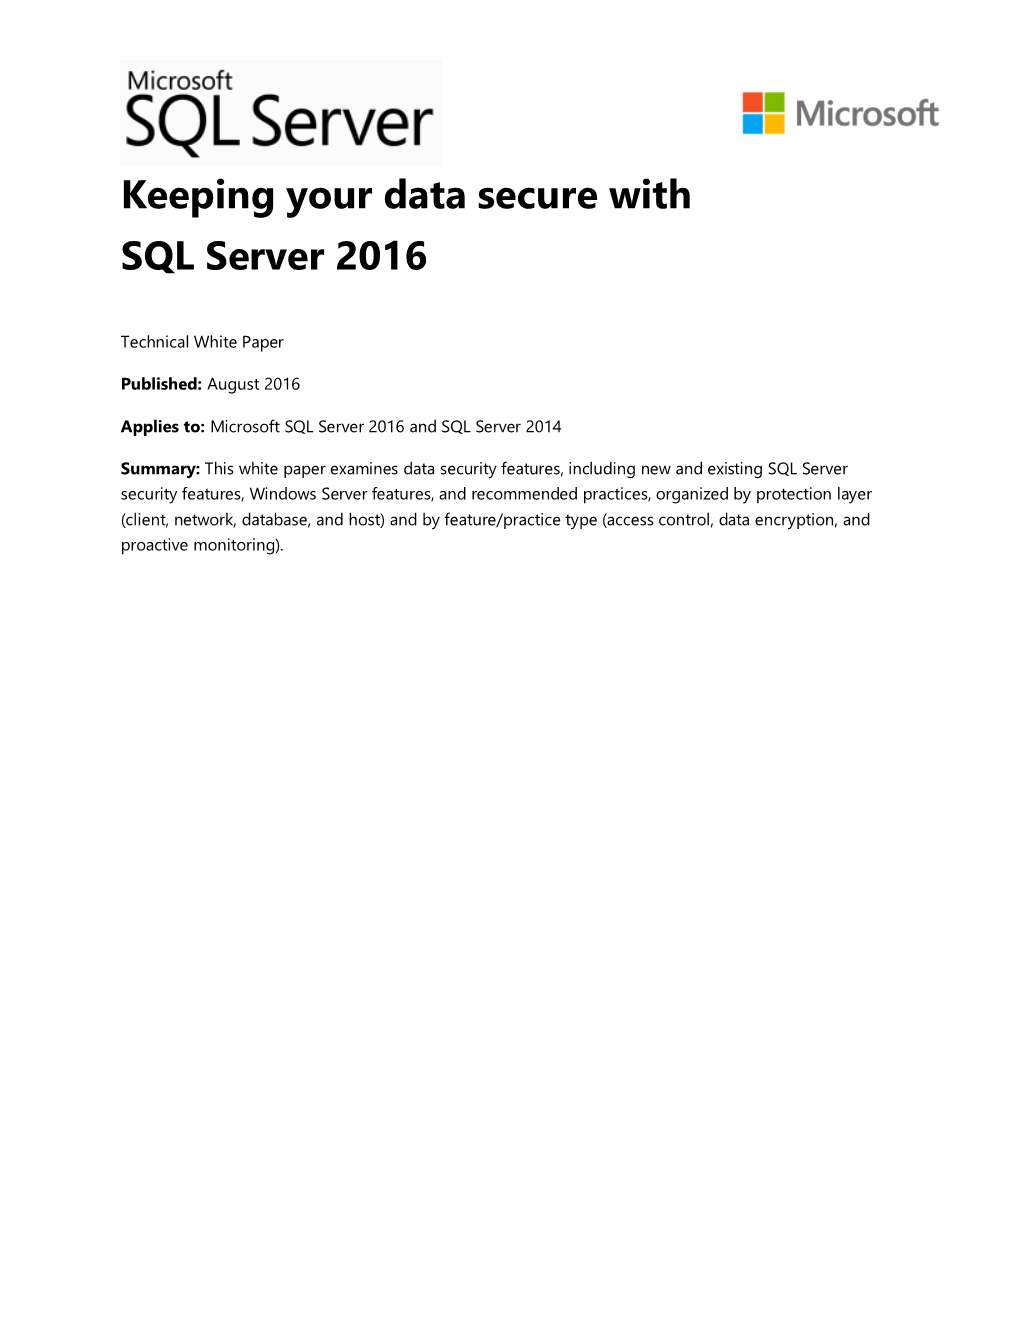 Keeping Your Data Secure with SQL Server 2016